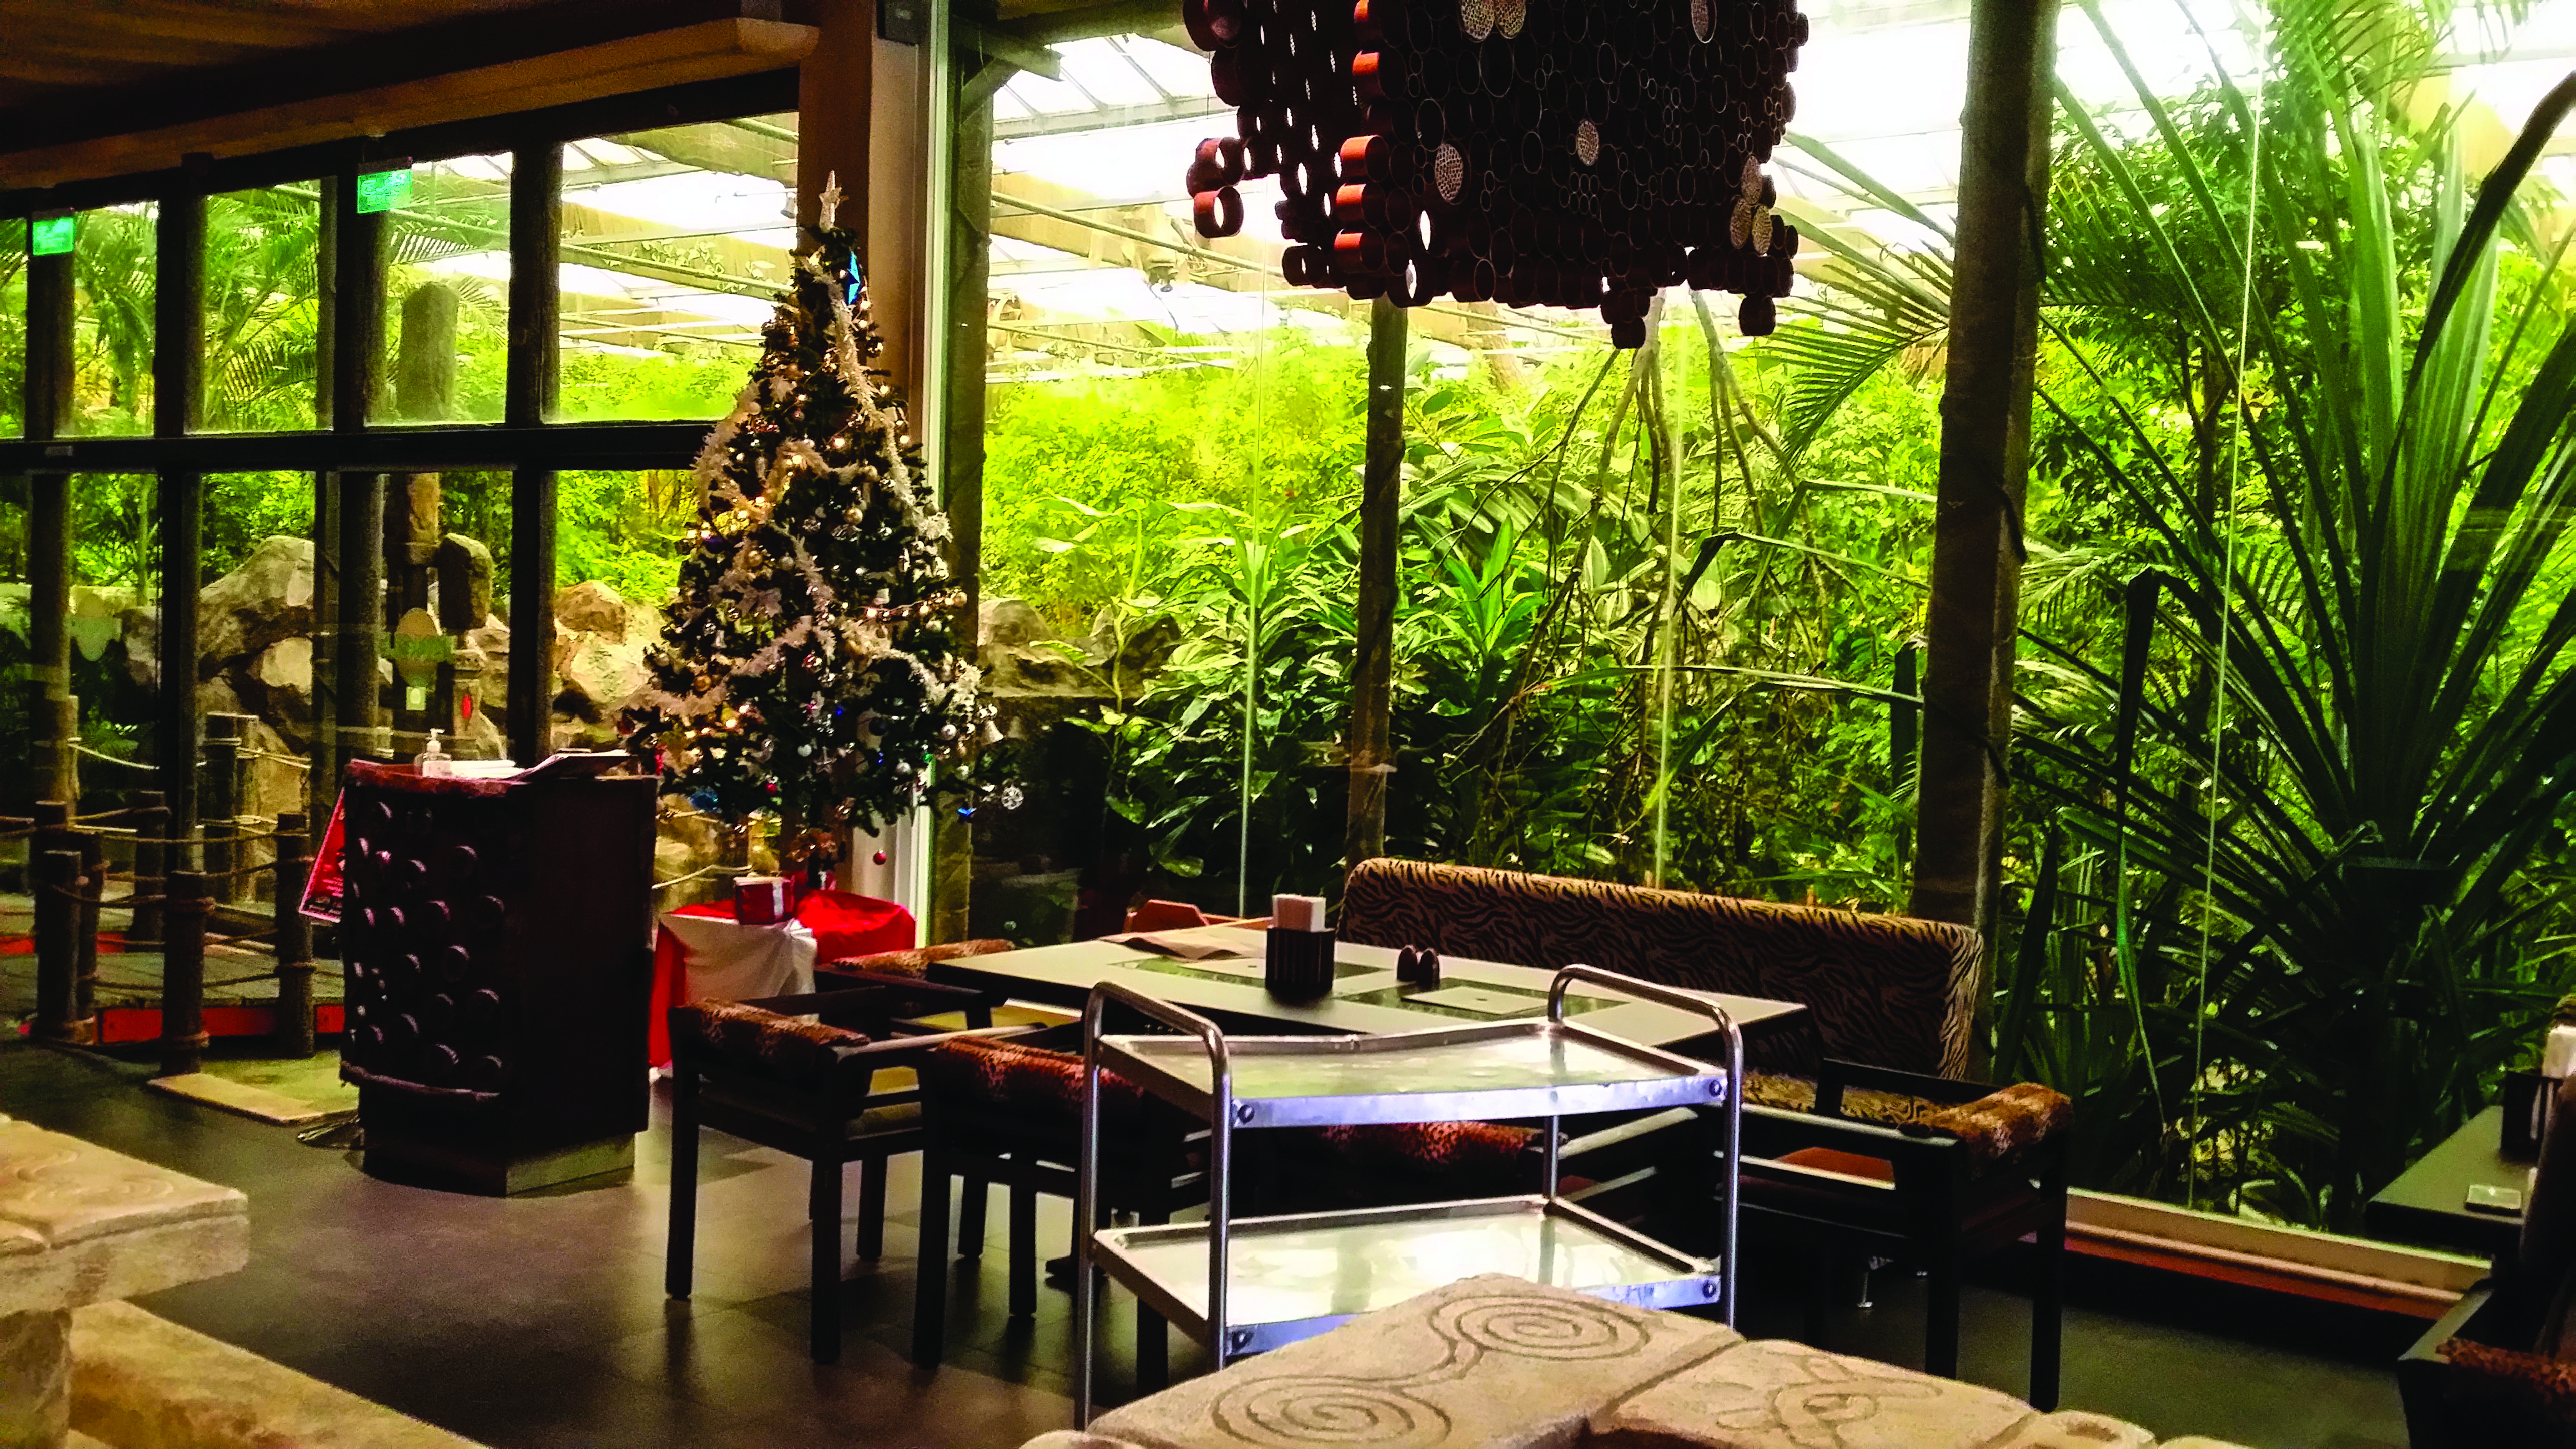 Oman dining: This weekend eat at Jungle